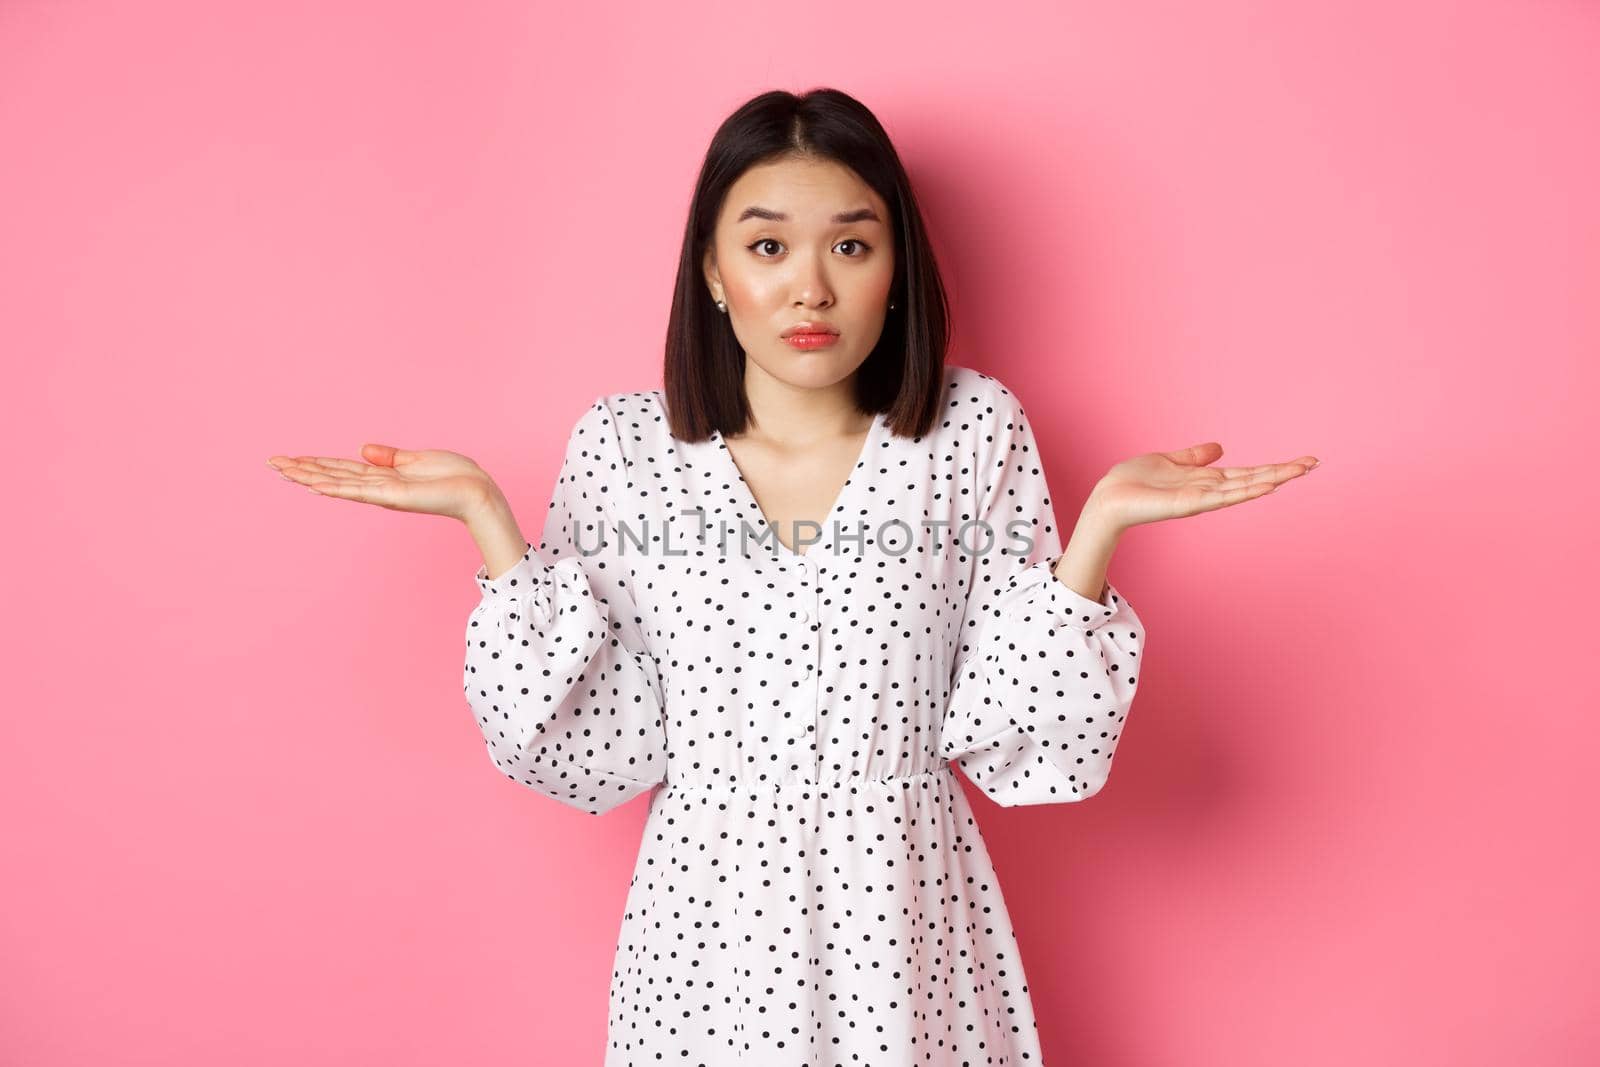 Indecisive cute asian woman shrugging, holding hands spread sideways on copy spaces, dont know, having doubts, standing over pink background.